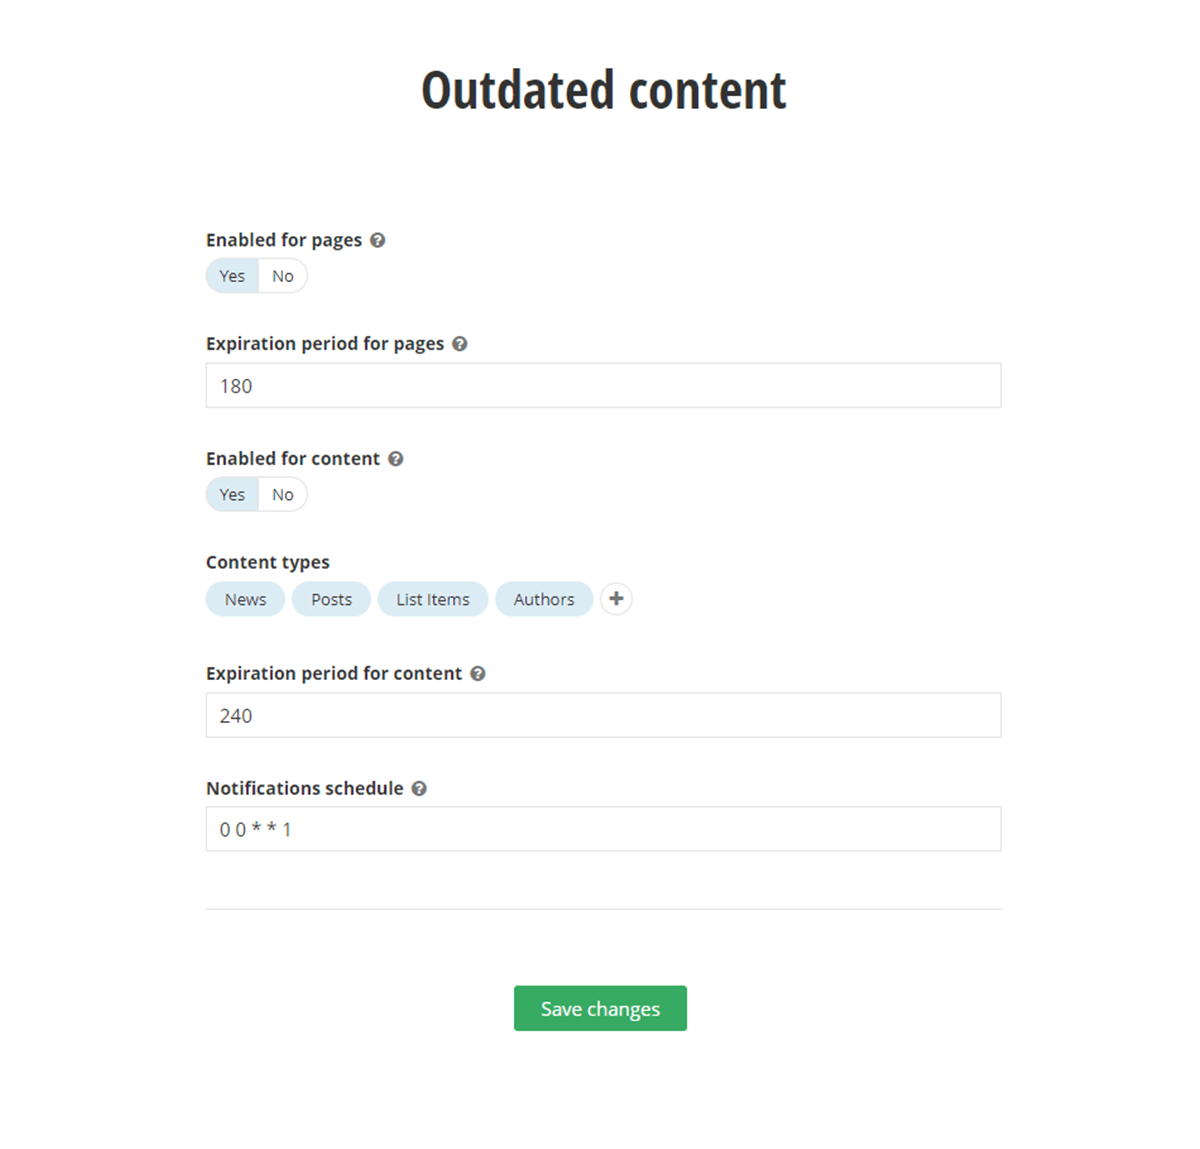 outdated-content-basic-settings-1200x620.png